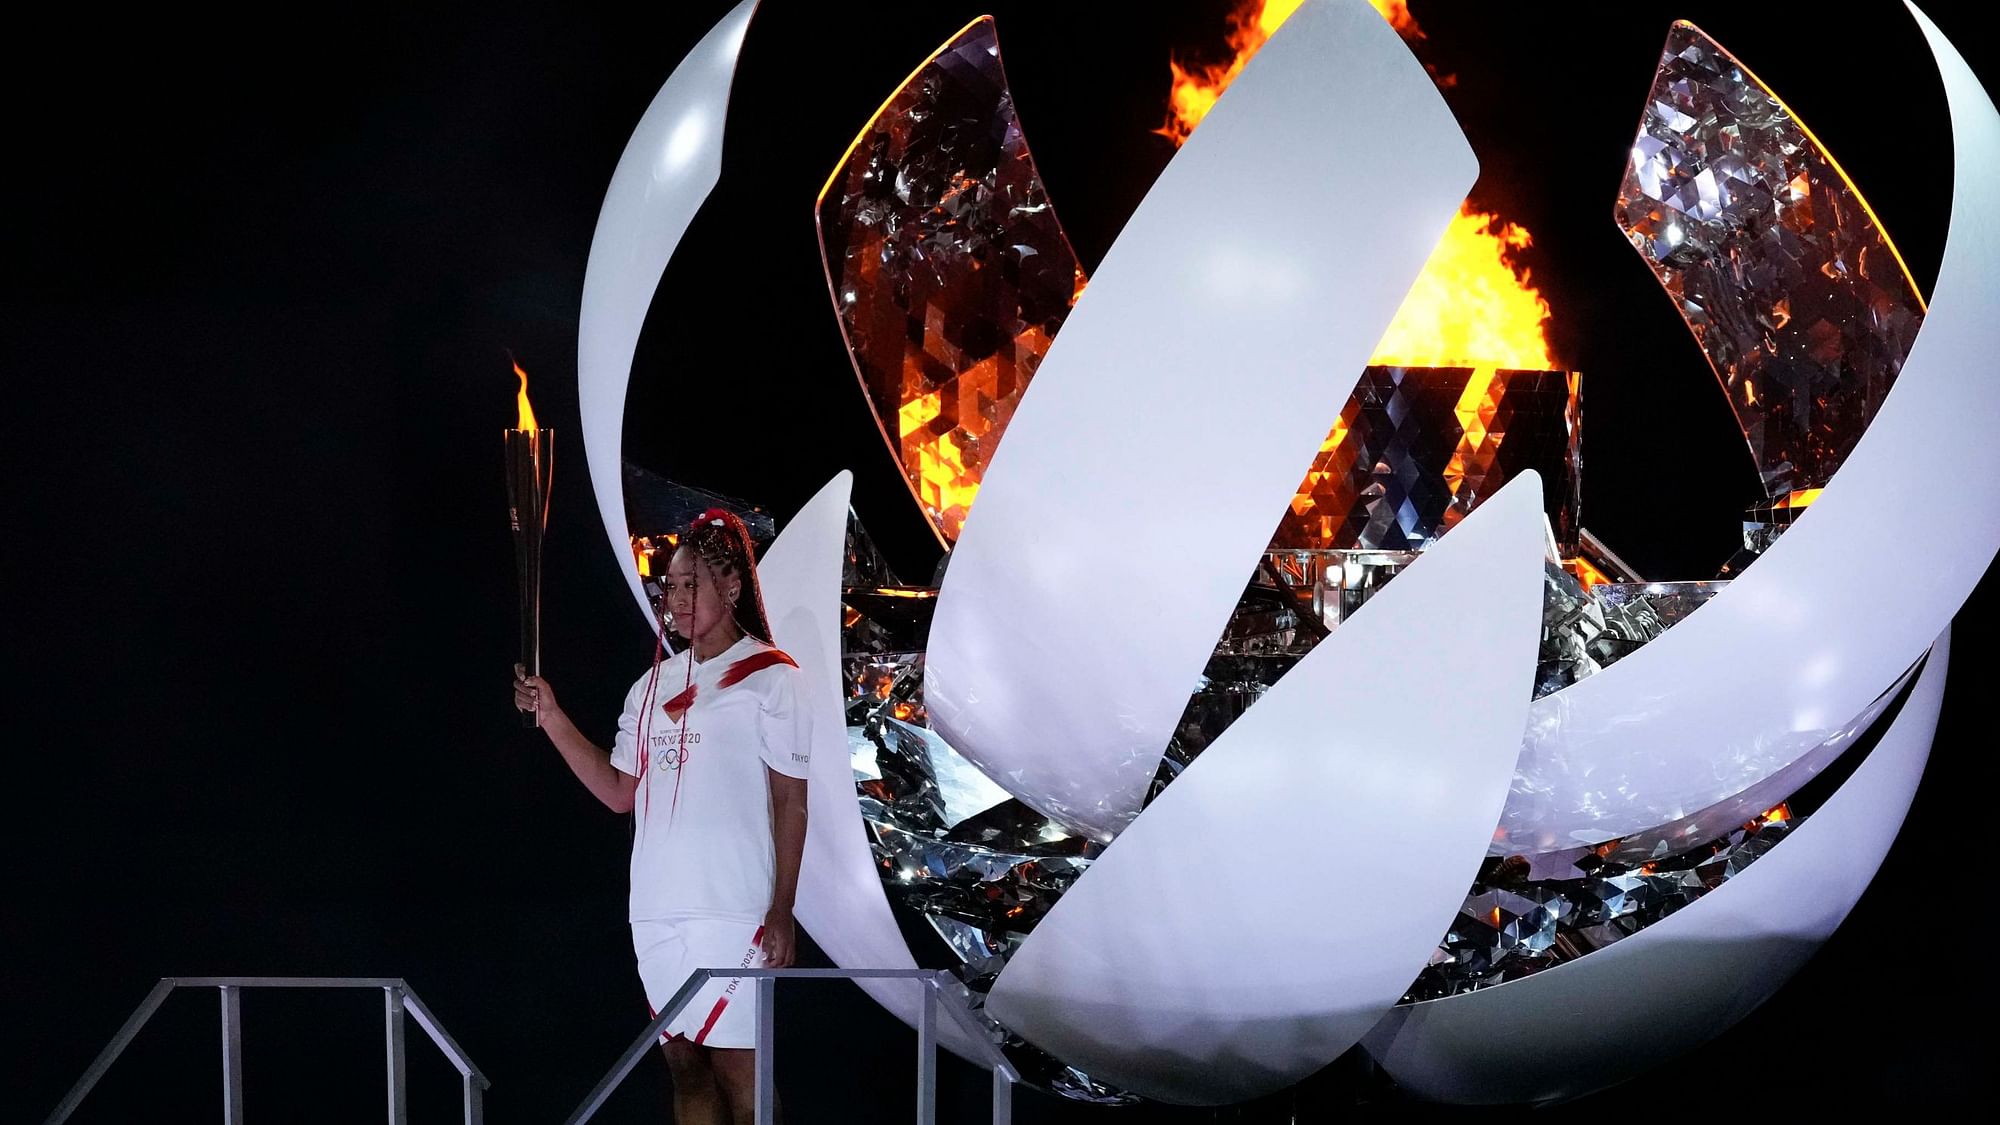 <div class="paragraphs"><p>Tokyo: Japan's Naomi Osaka reacts after lighting the cauldron during the opening ceremony in the Olympic Stadium at the 2020 Summer Olympics.</p></div>